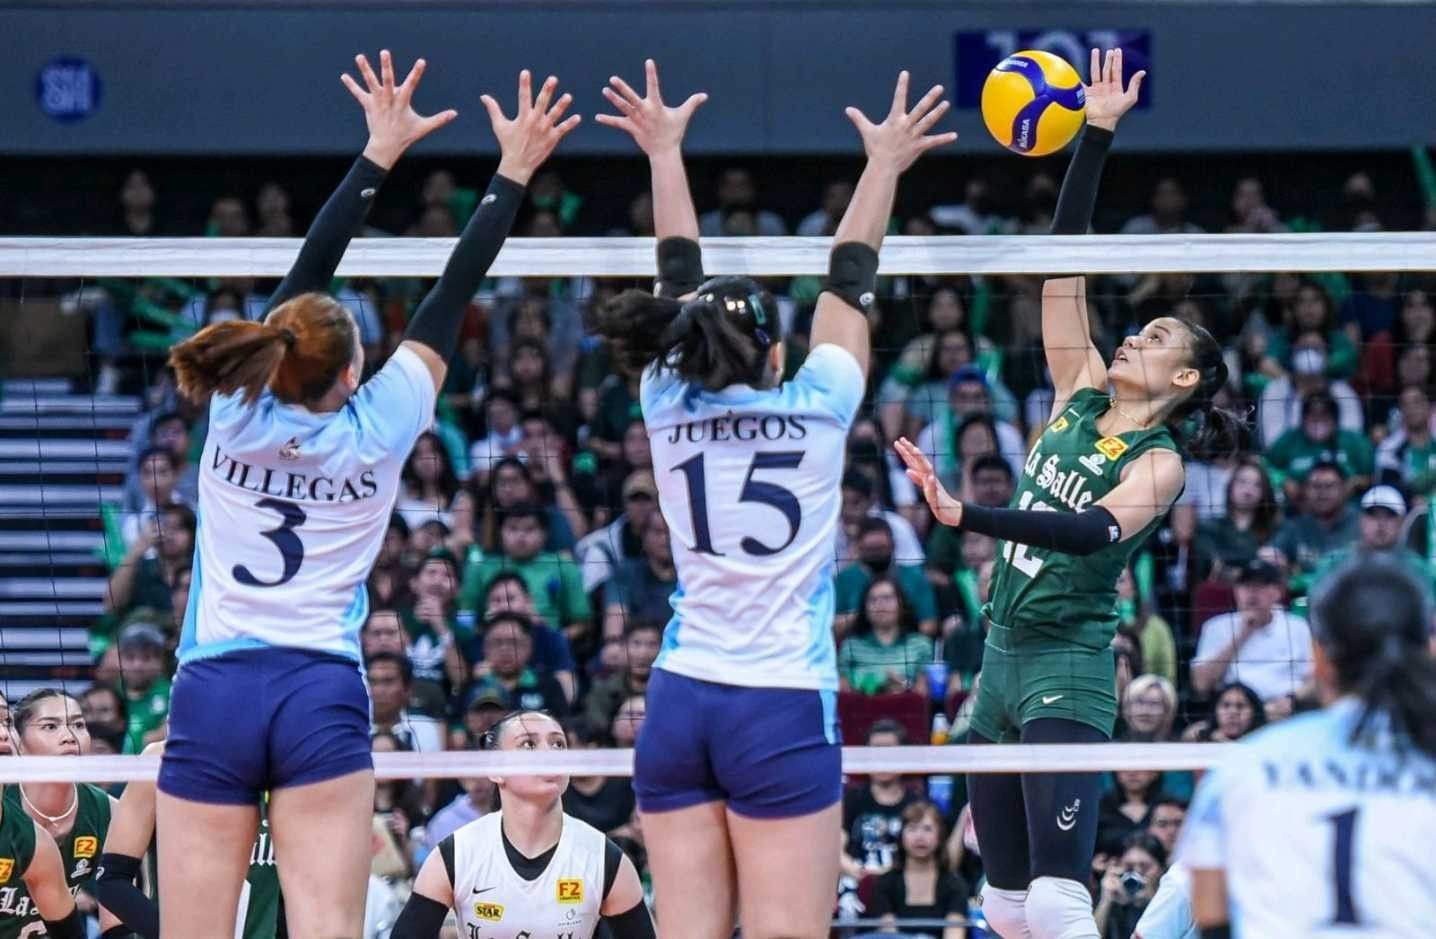 Lady Spikers make quick work of Lady Falcons for De Jesusâ�� 300th win